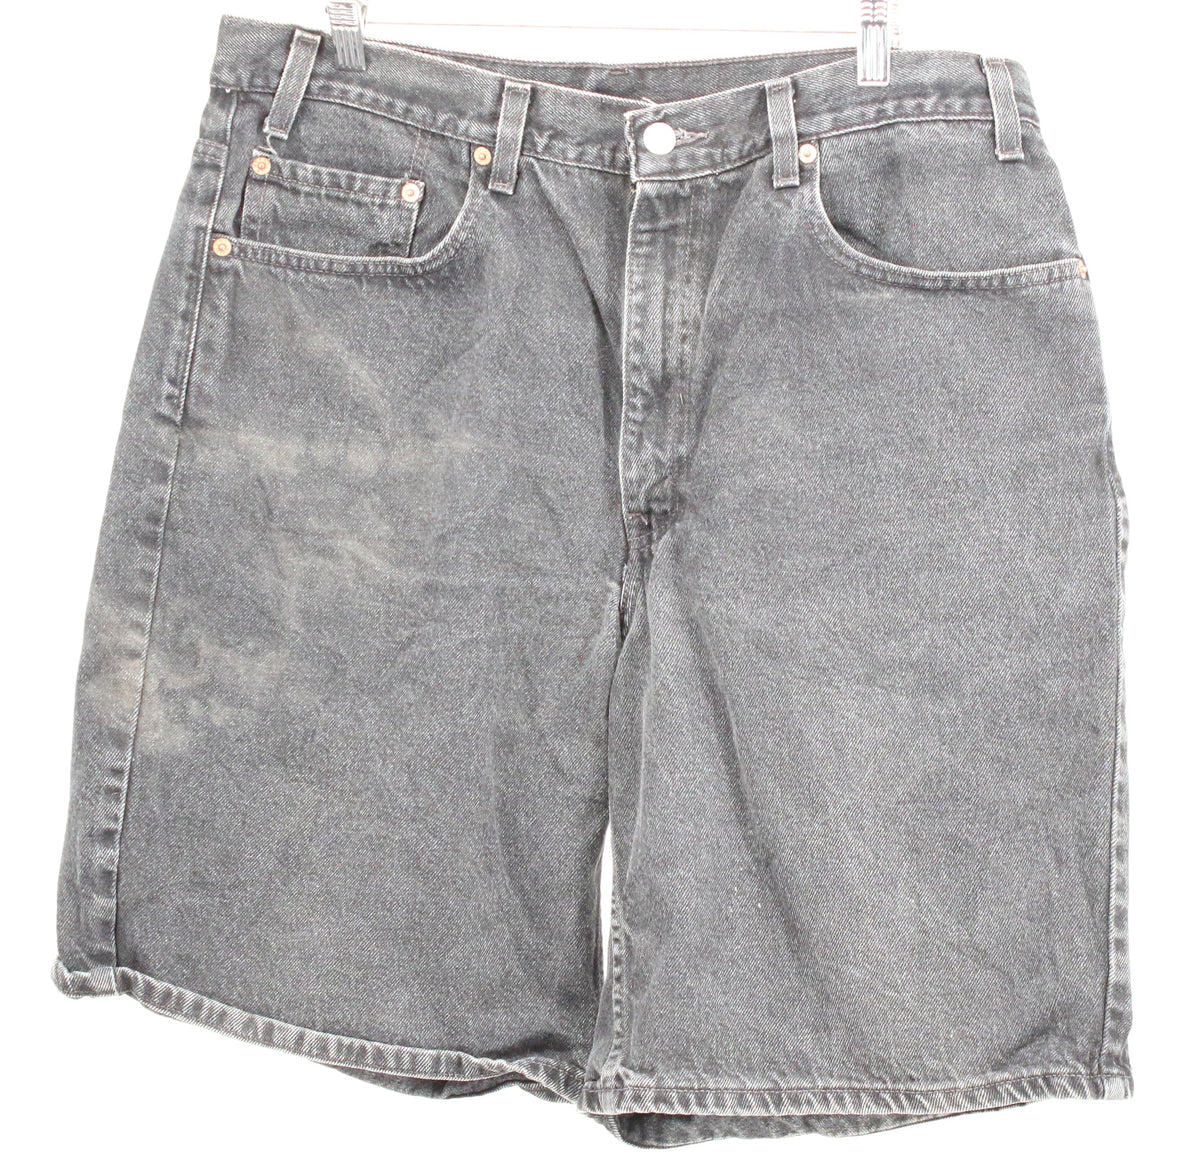 Levis 550 Relaxed Fit Washed Black Baggy Shorts